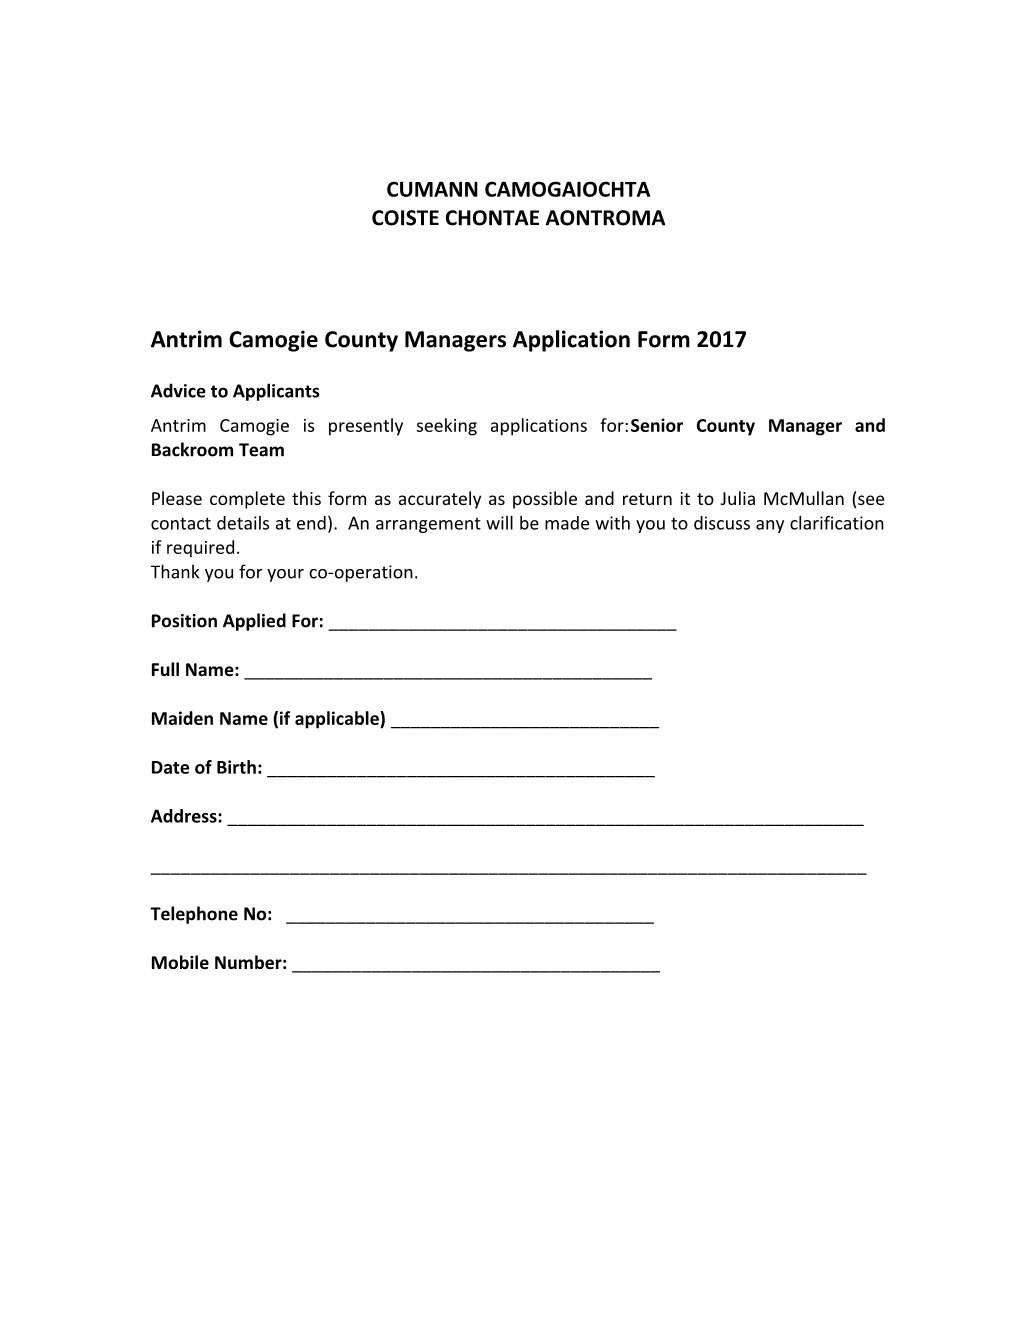 Application Form for Newly Recruited